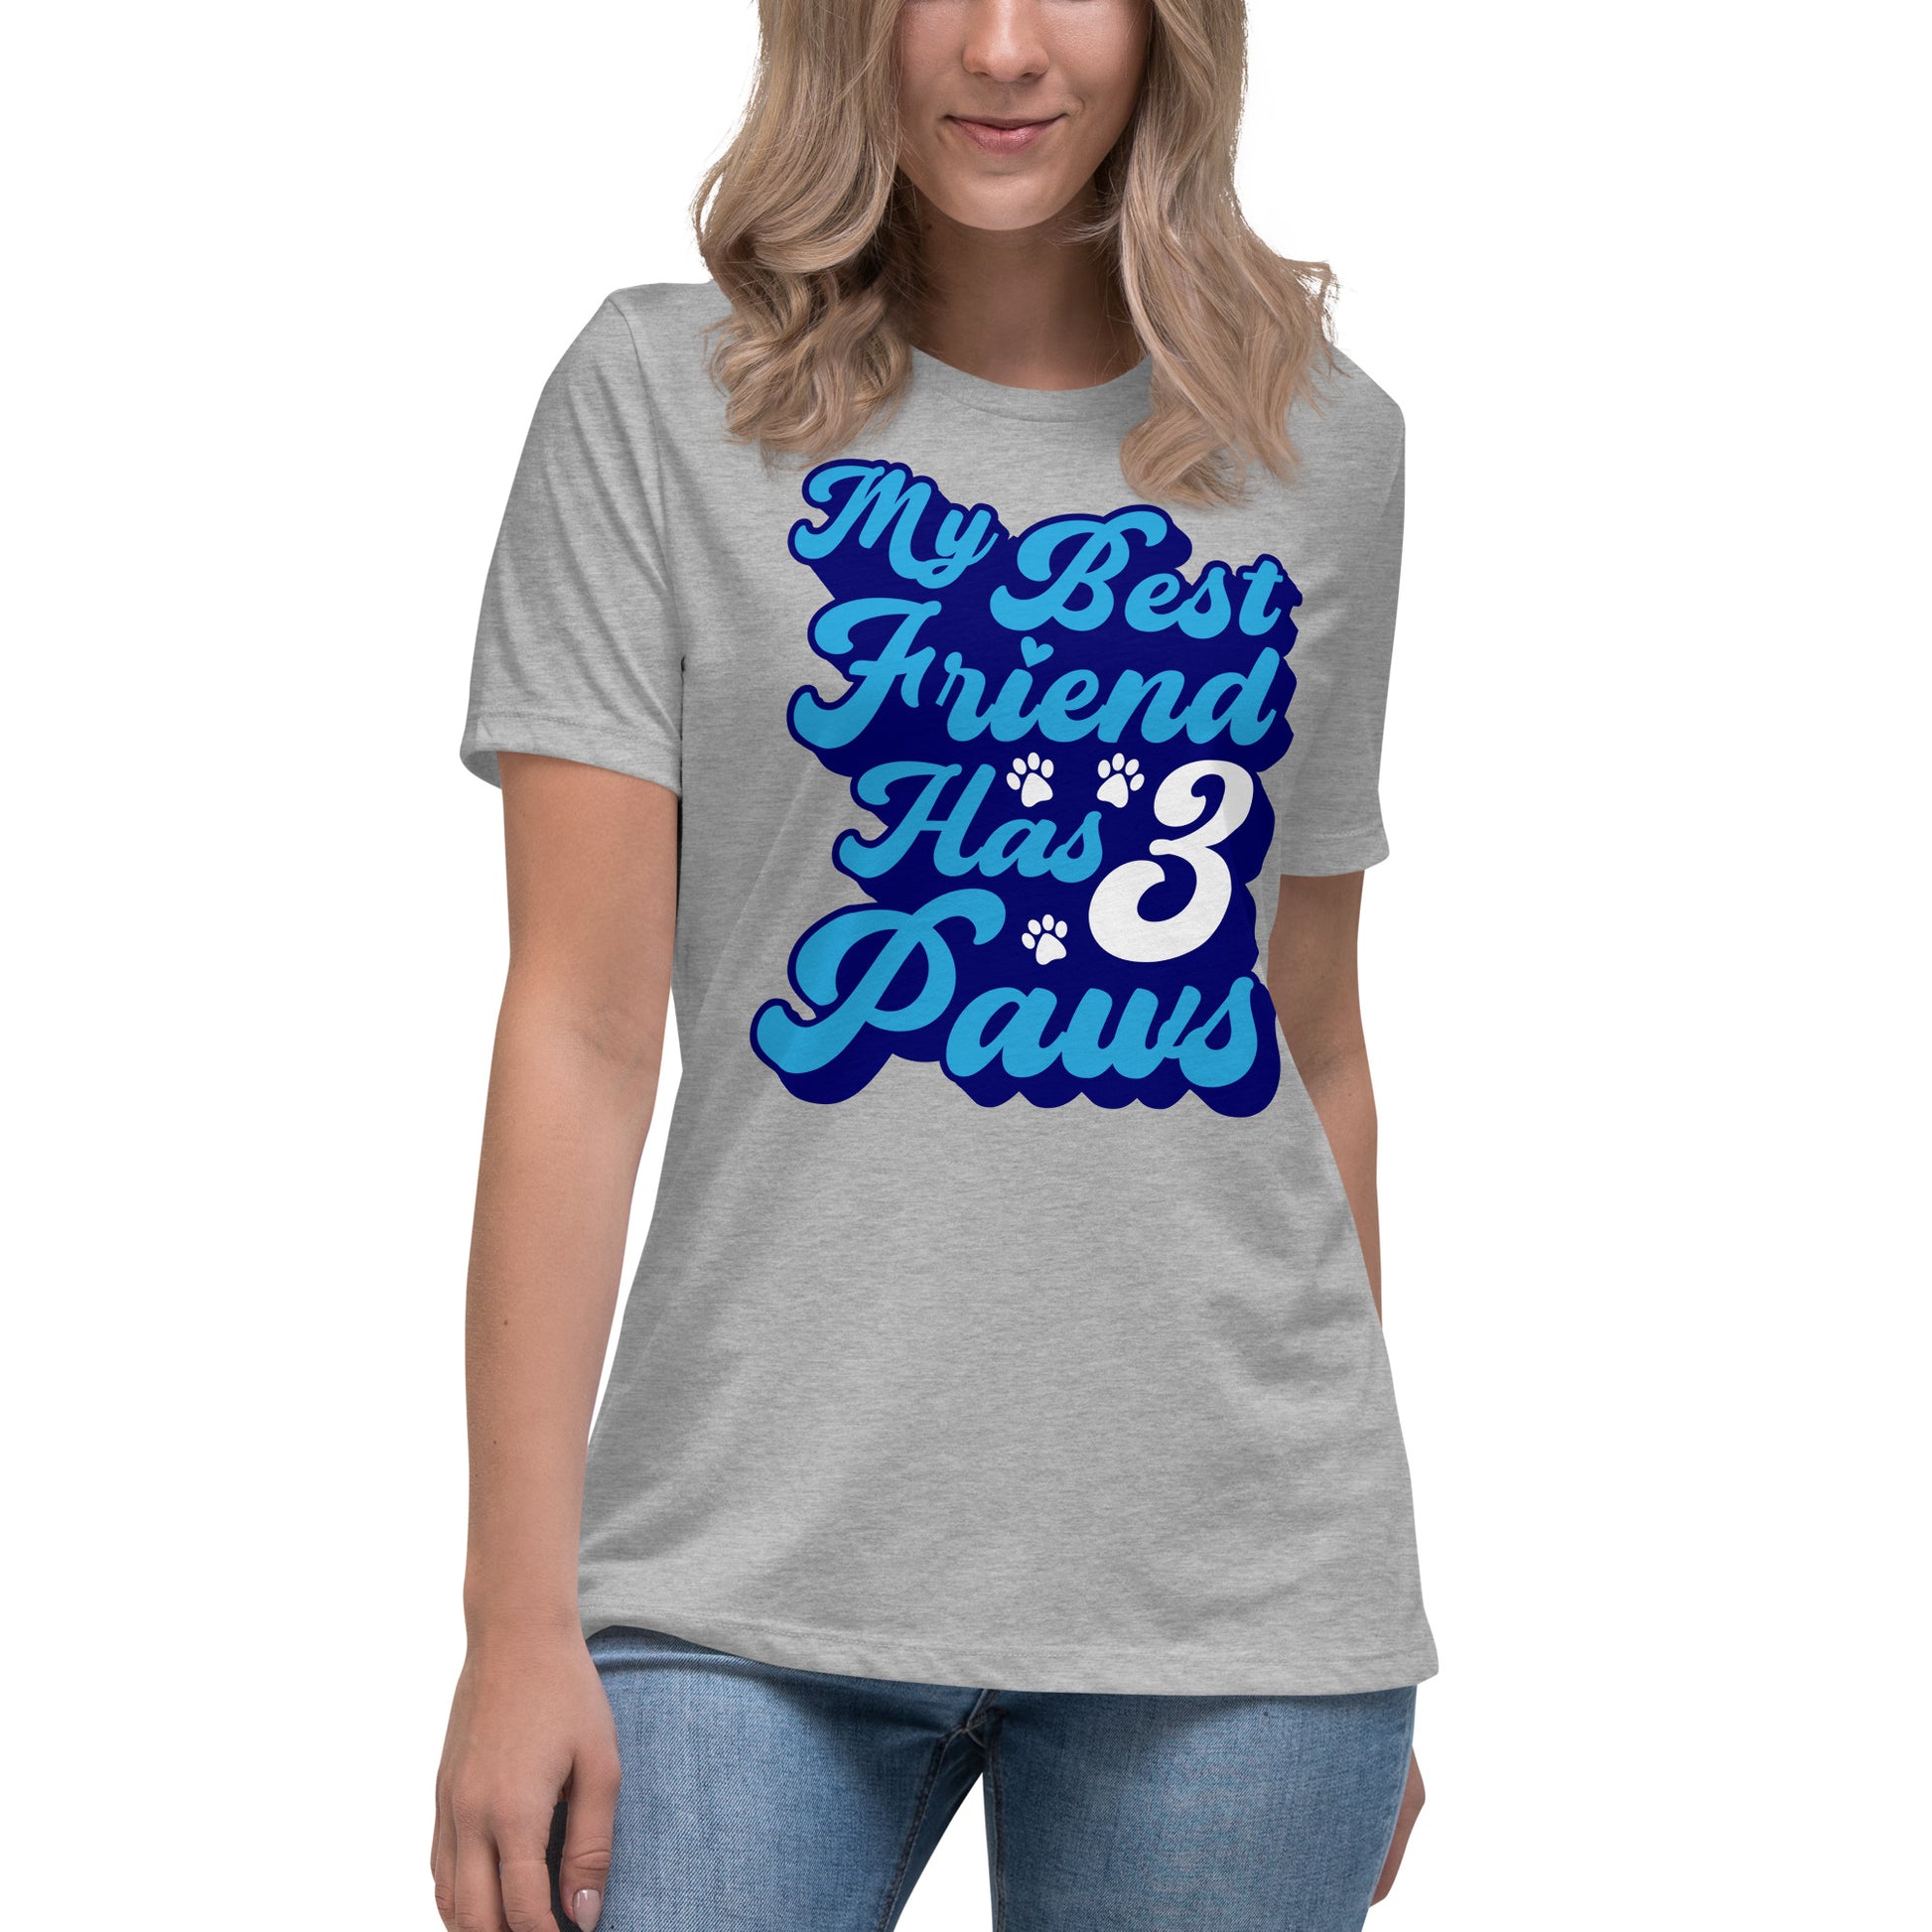 My best friend has 3 Paws women’s relaxed fit t-shirts by Dog Artistry athletic heather color